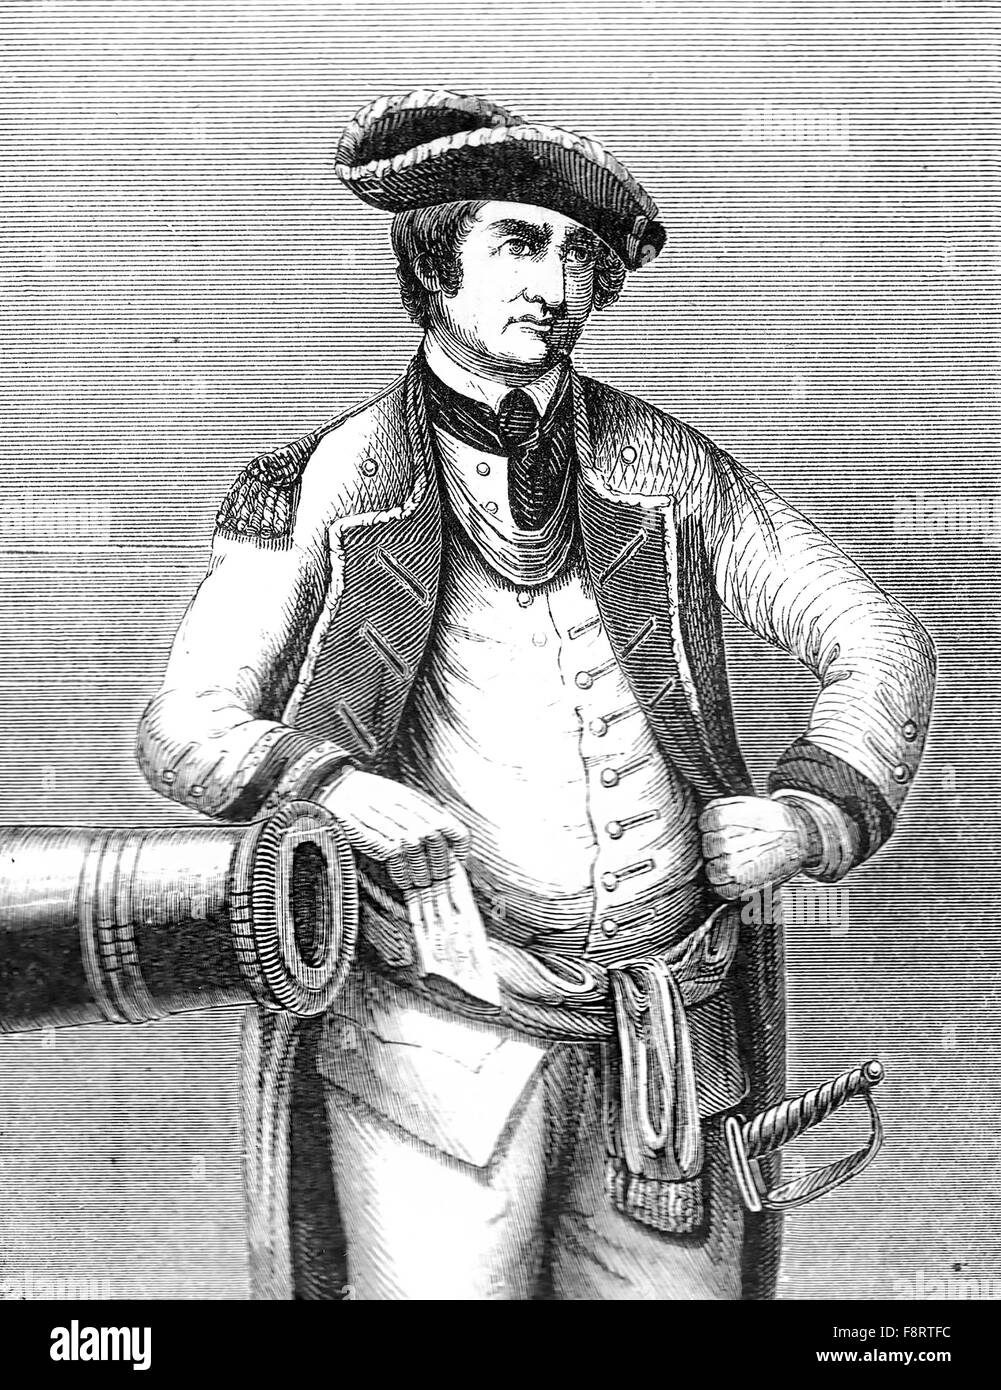 ISRAEL PUTNAM (1718-1790) American army officer Stock Photo